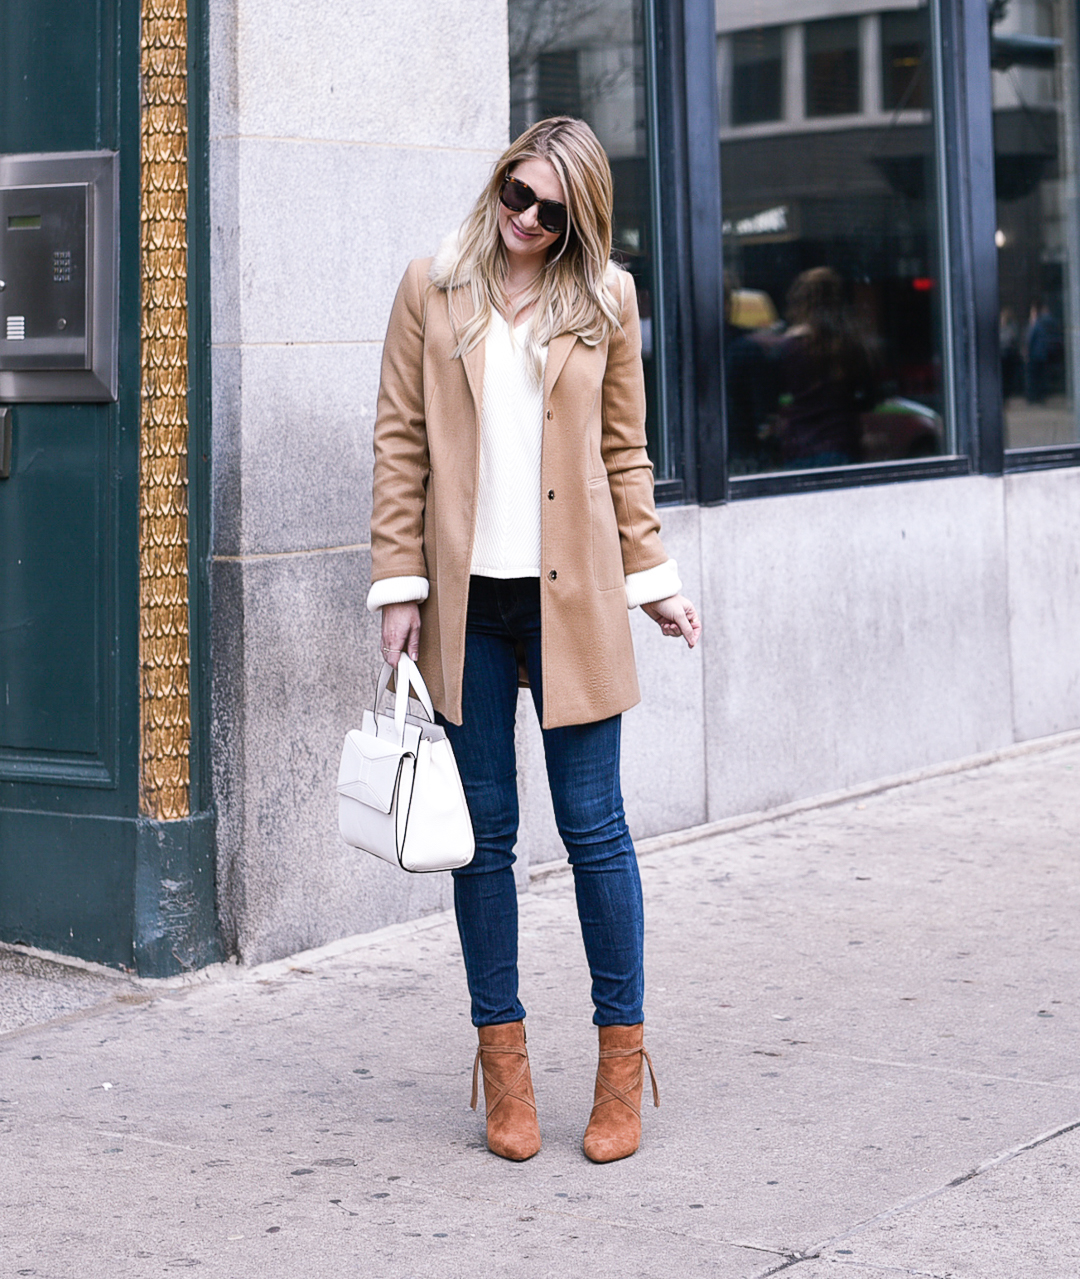 Topshop Faux Fur Collar Coat in camel and high waisted skinny jeans.